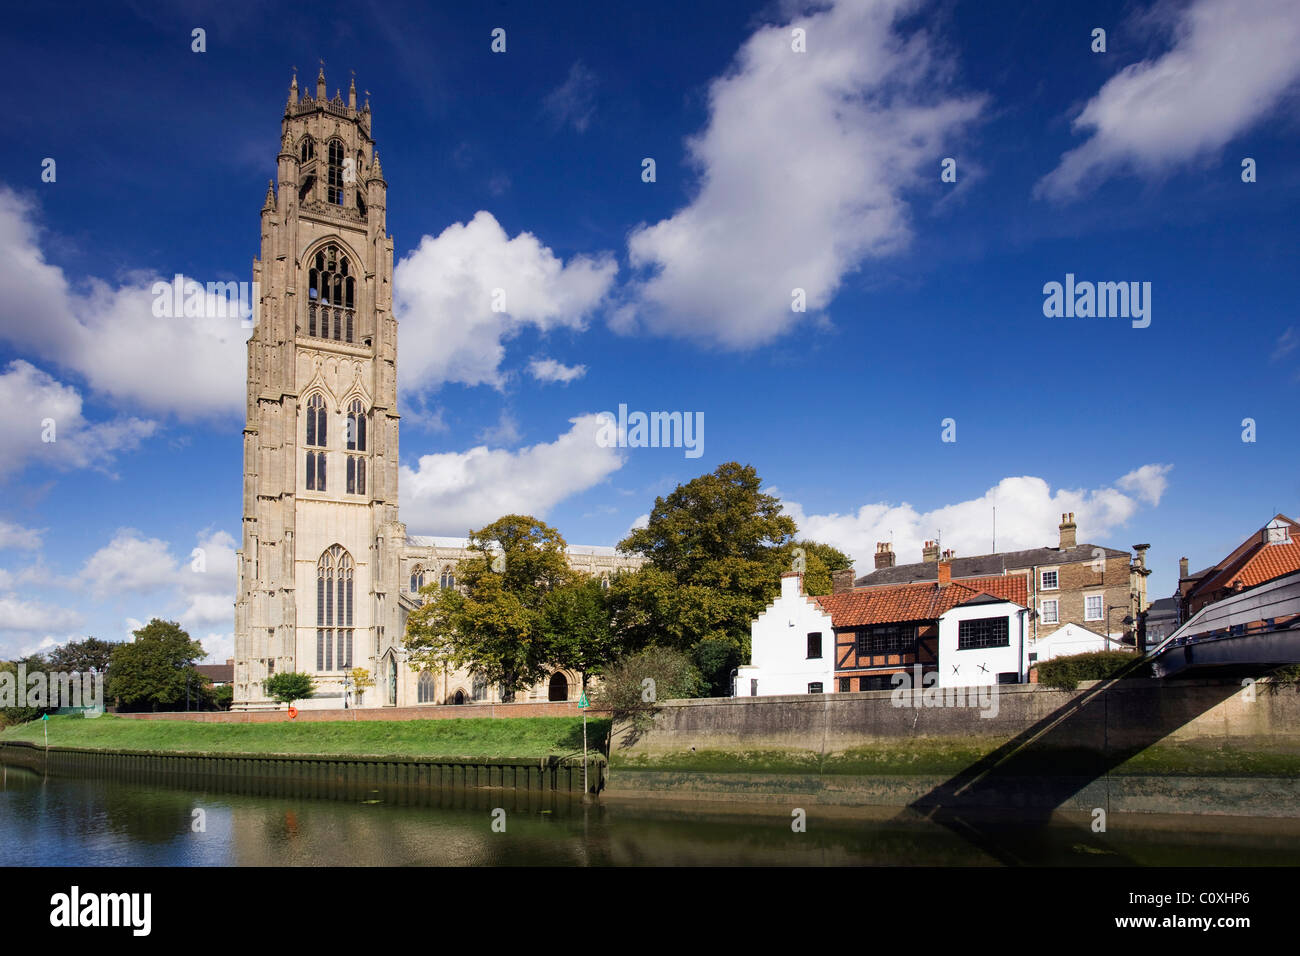 St Botolph's Church in Boston, Lincolnshire, and the Haven river. The church is known locally as the Boston Stump. Stock Photo